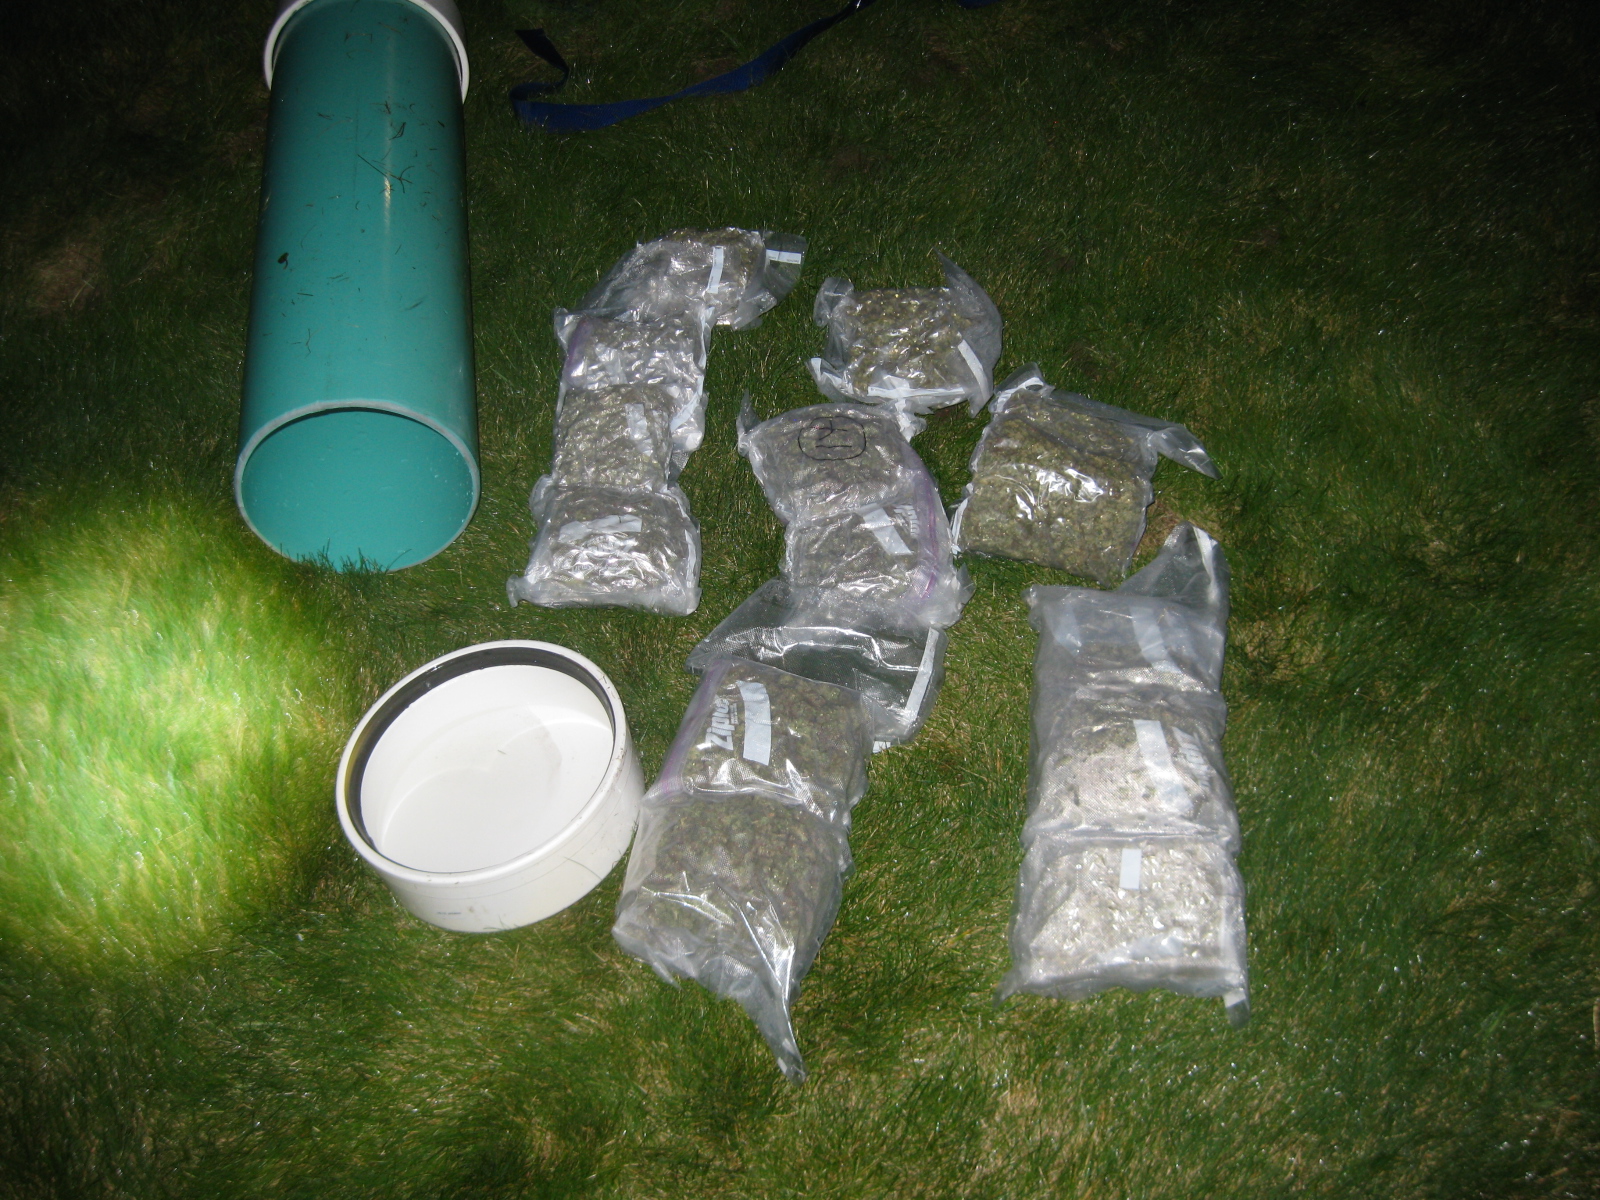 U.S. Border Patrol agents found more than 8 pounds of marijuana in this PVC pipe, smuggled across the St. Clair River by a Canadian scuba diver. (Credit: U.S. Border Patrol)